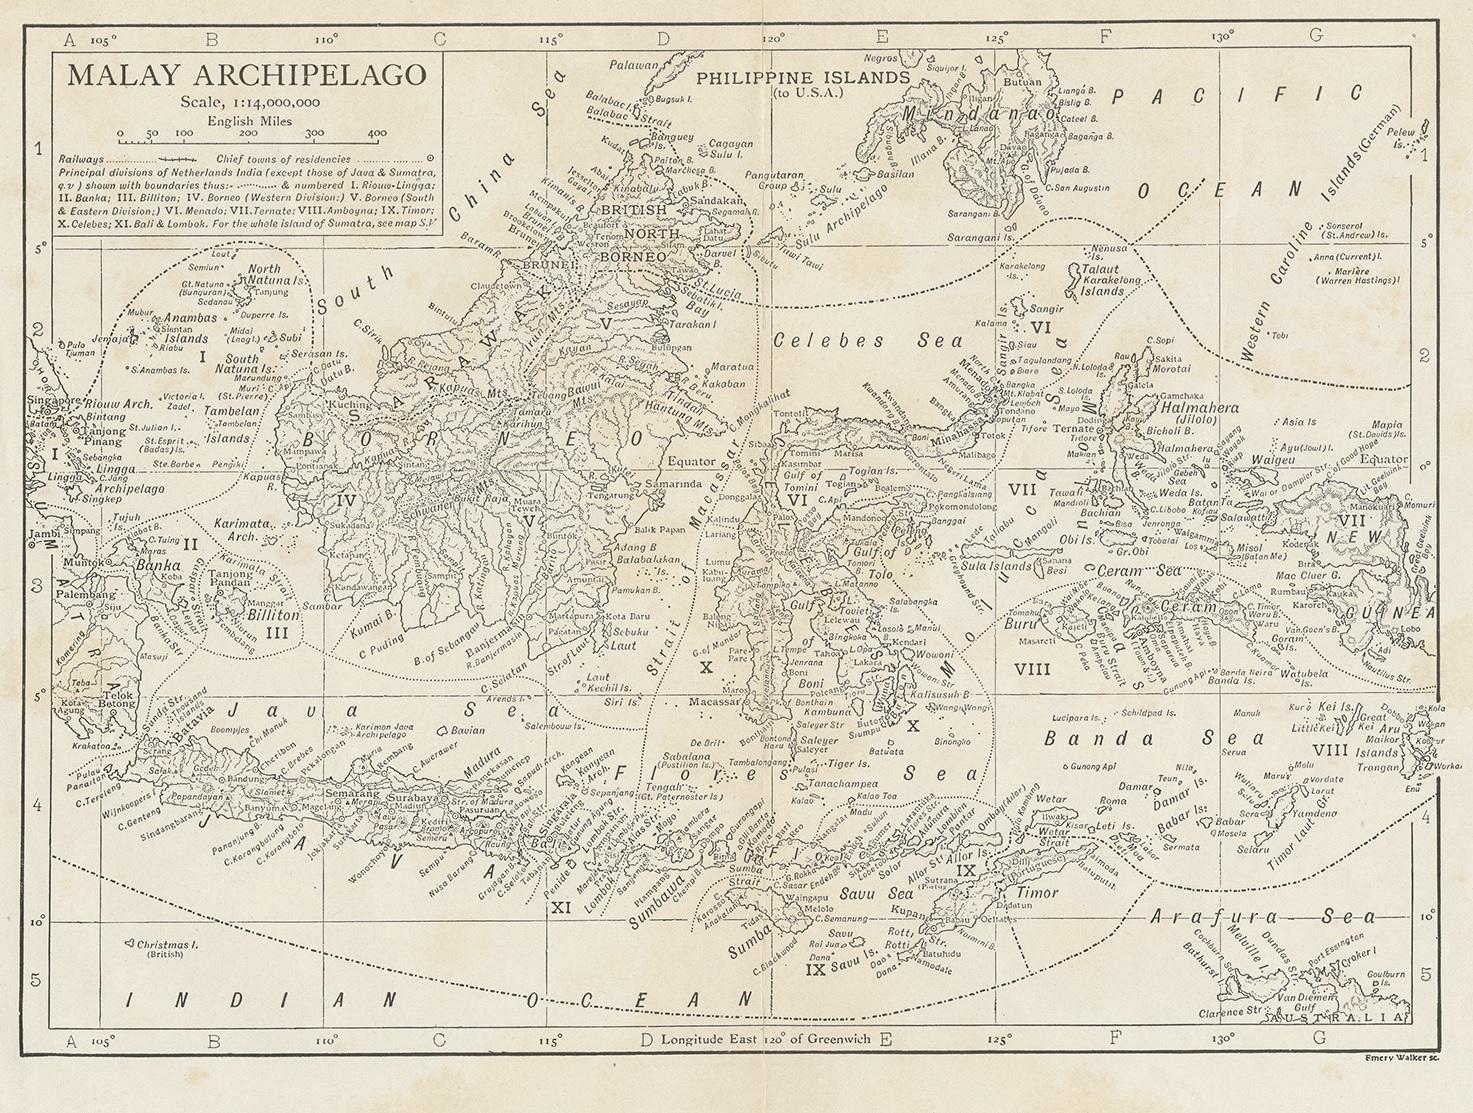 Antique map titled 'Malay Archipelago'. Old map of the Malay Archipelago including Borneo, Celebes, New Guinea, Java, Timor and others. This map originates from 'Encyclopaedia Britannica'.